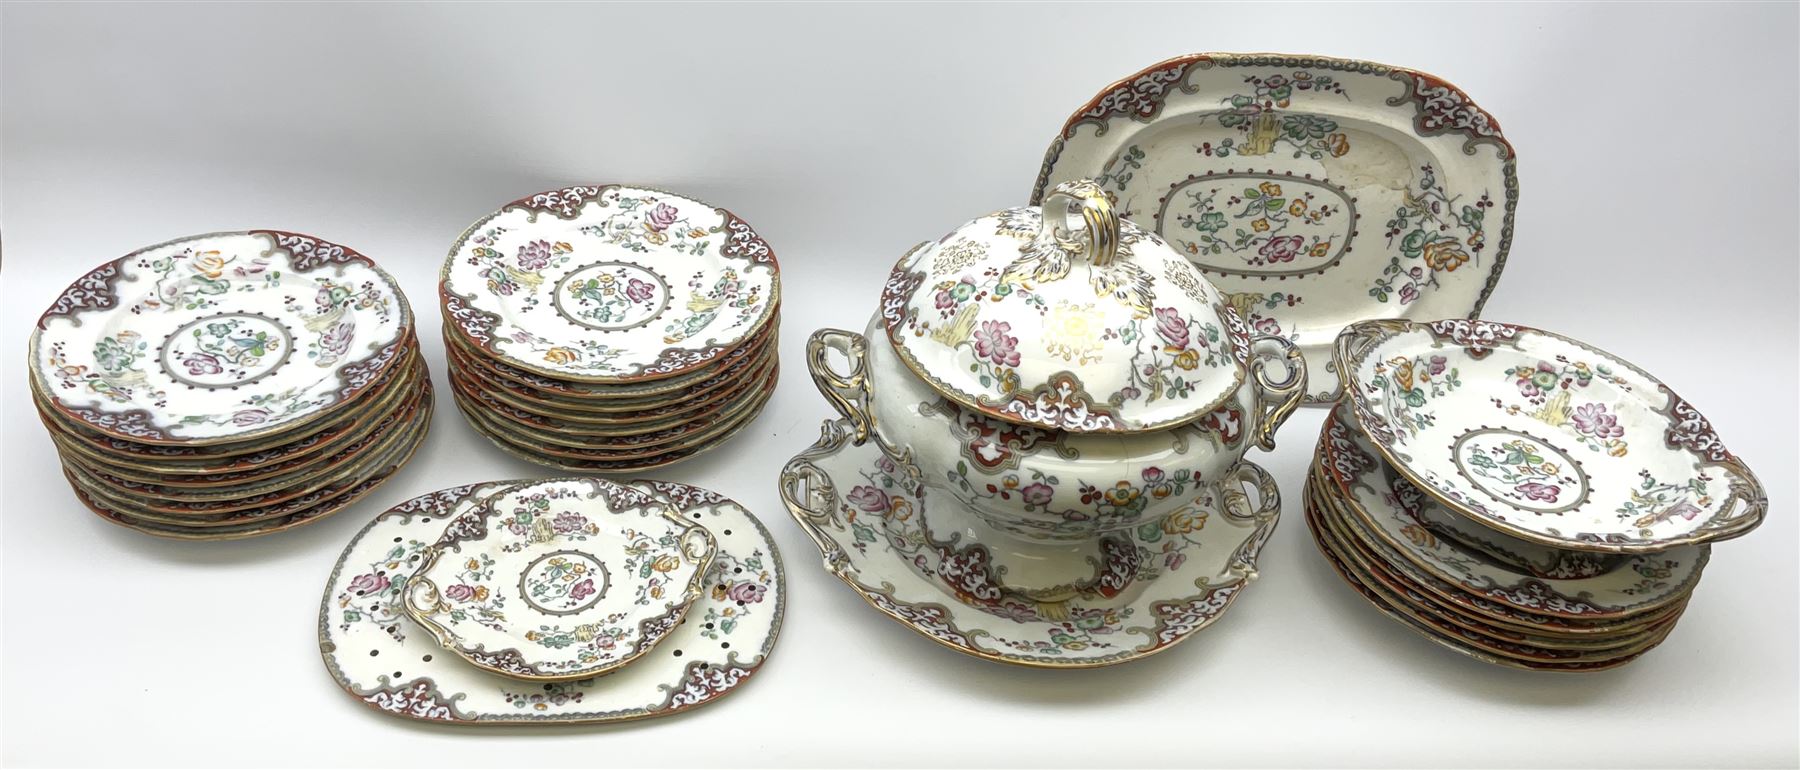 Victorian 'Oleaster' pattern stone China part dinner service by Charles Meigh